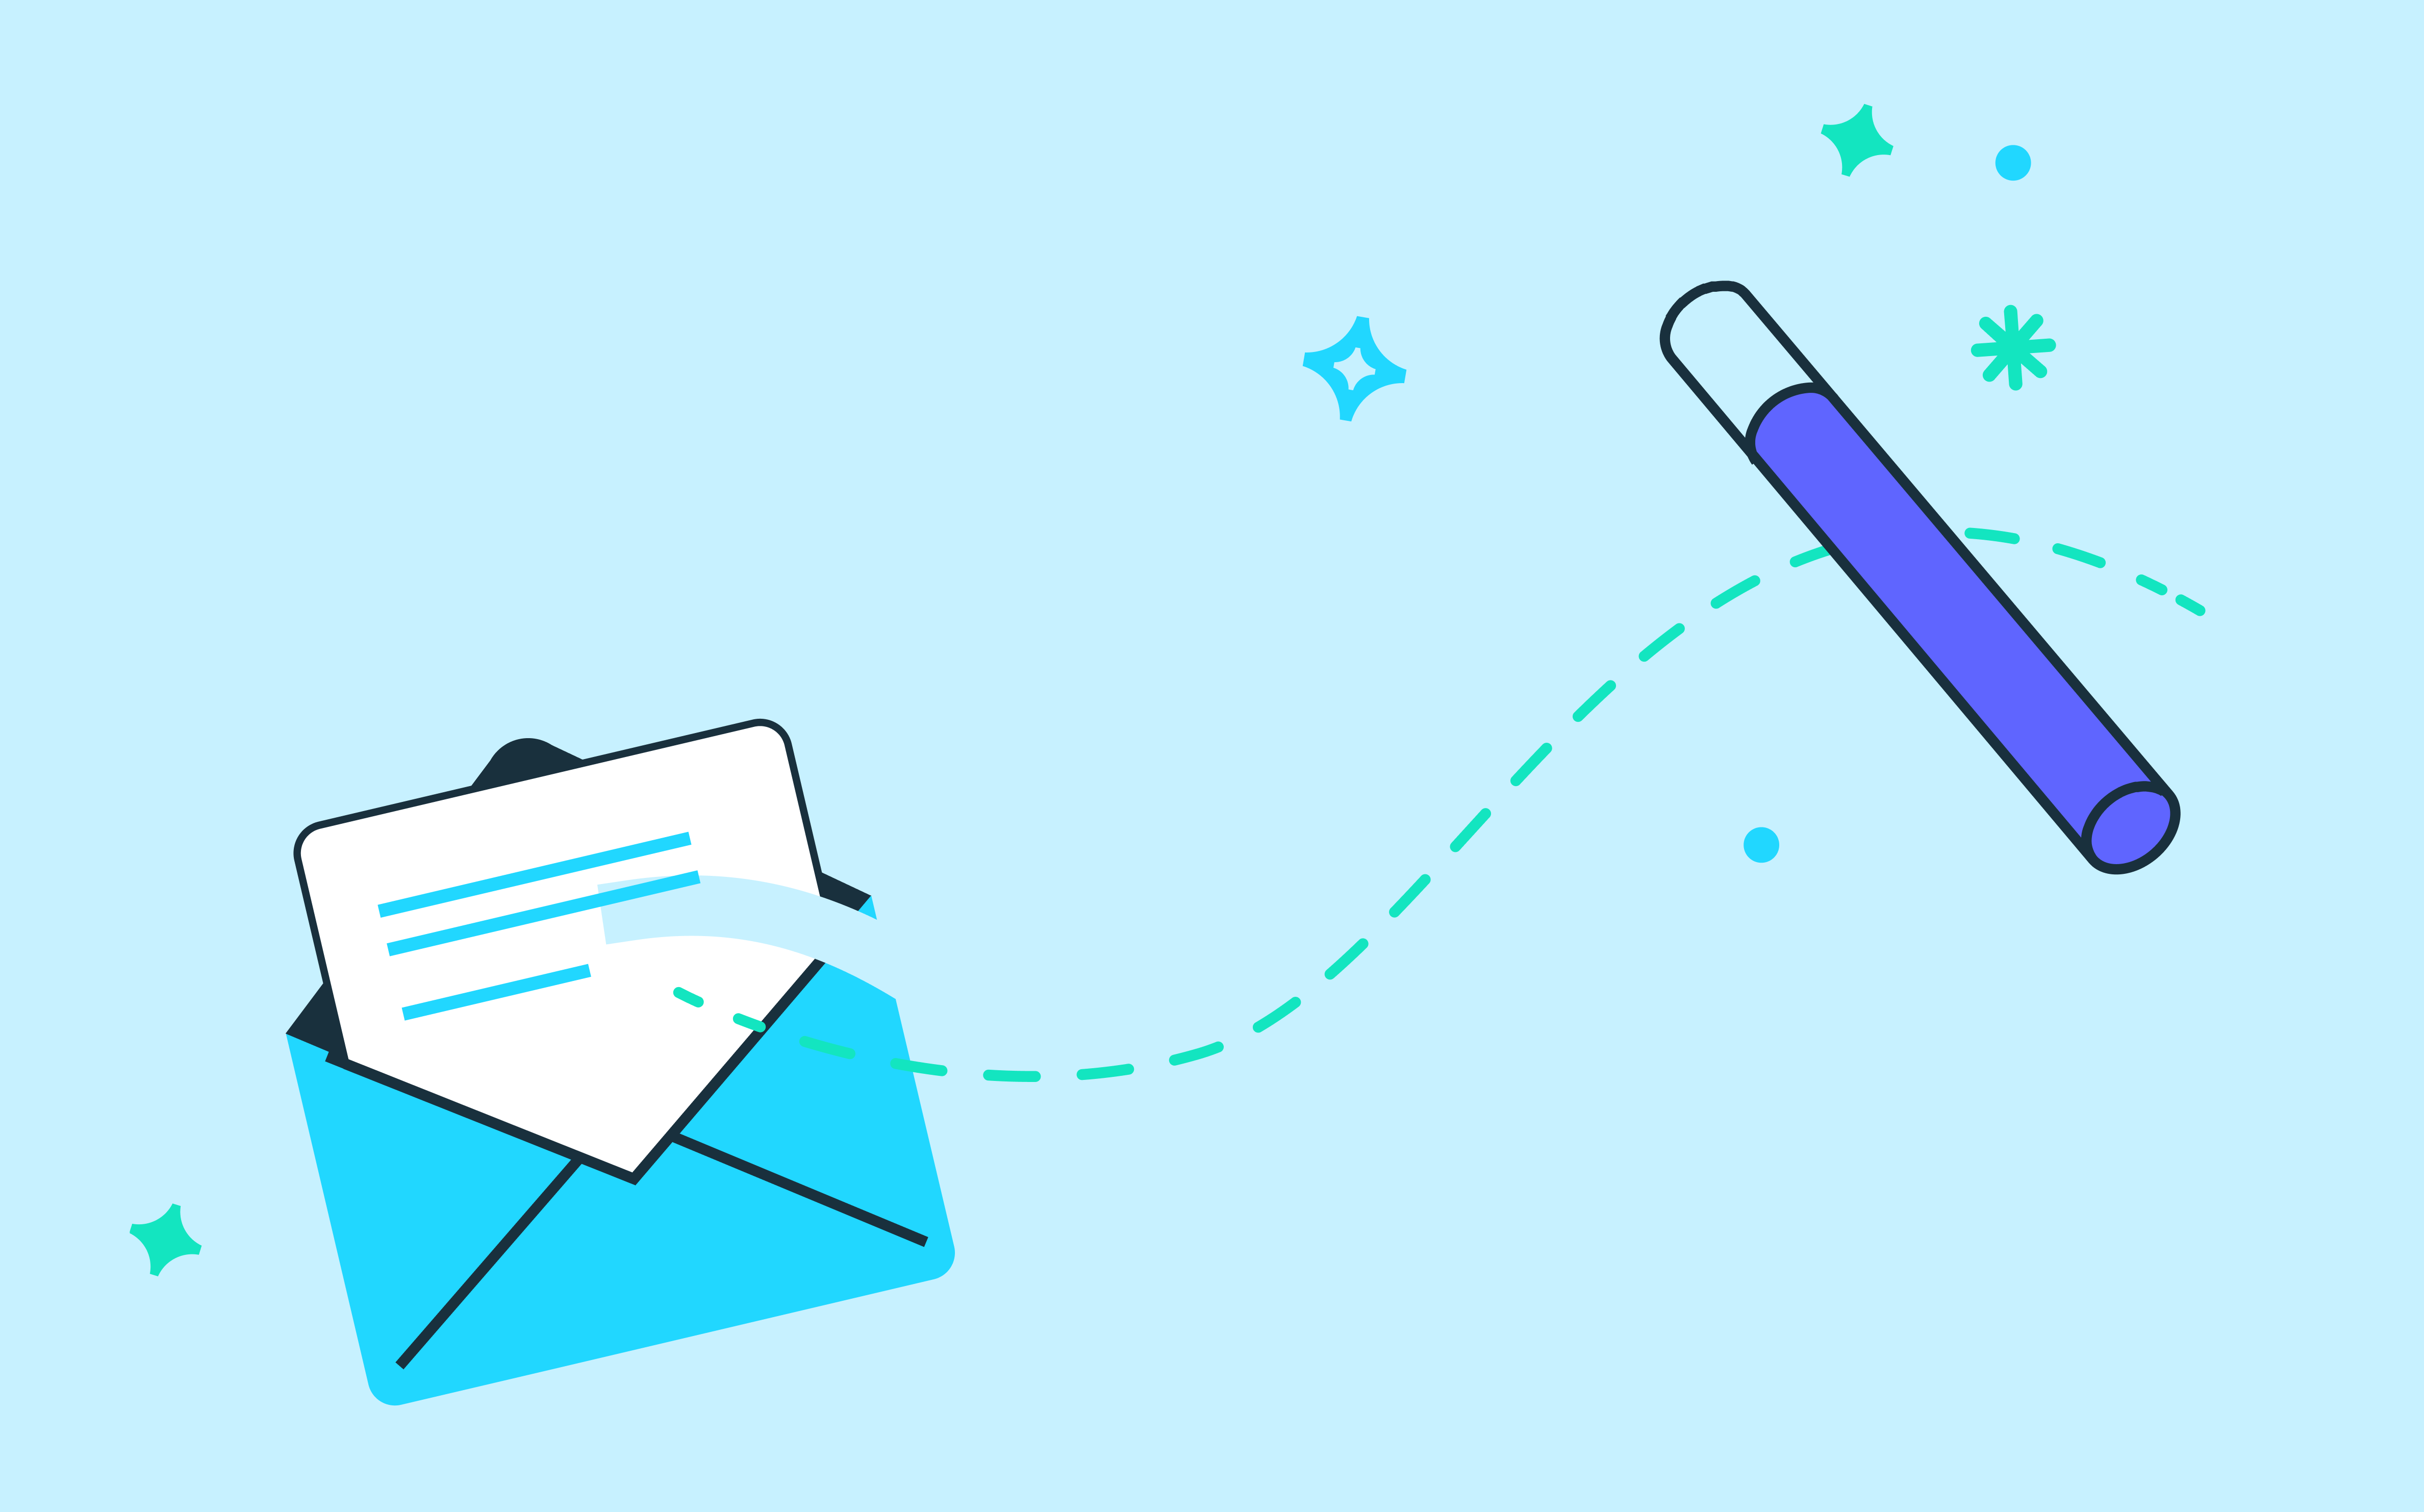 An abstracted cartoon of an envelope being magically animated by a wand, on a light blue backdrop